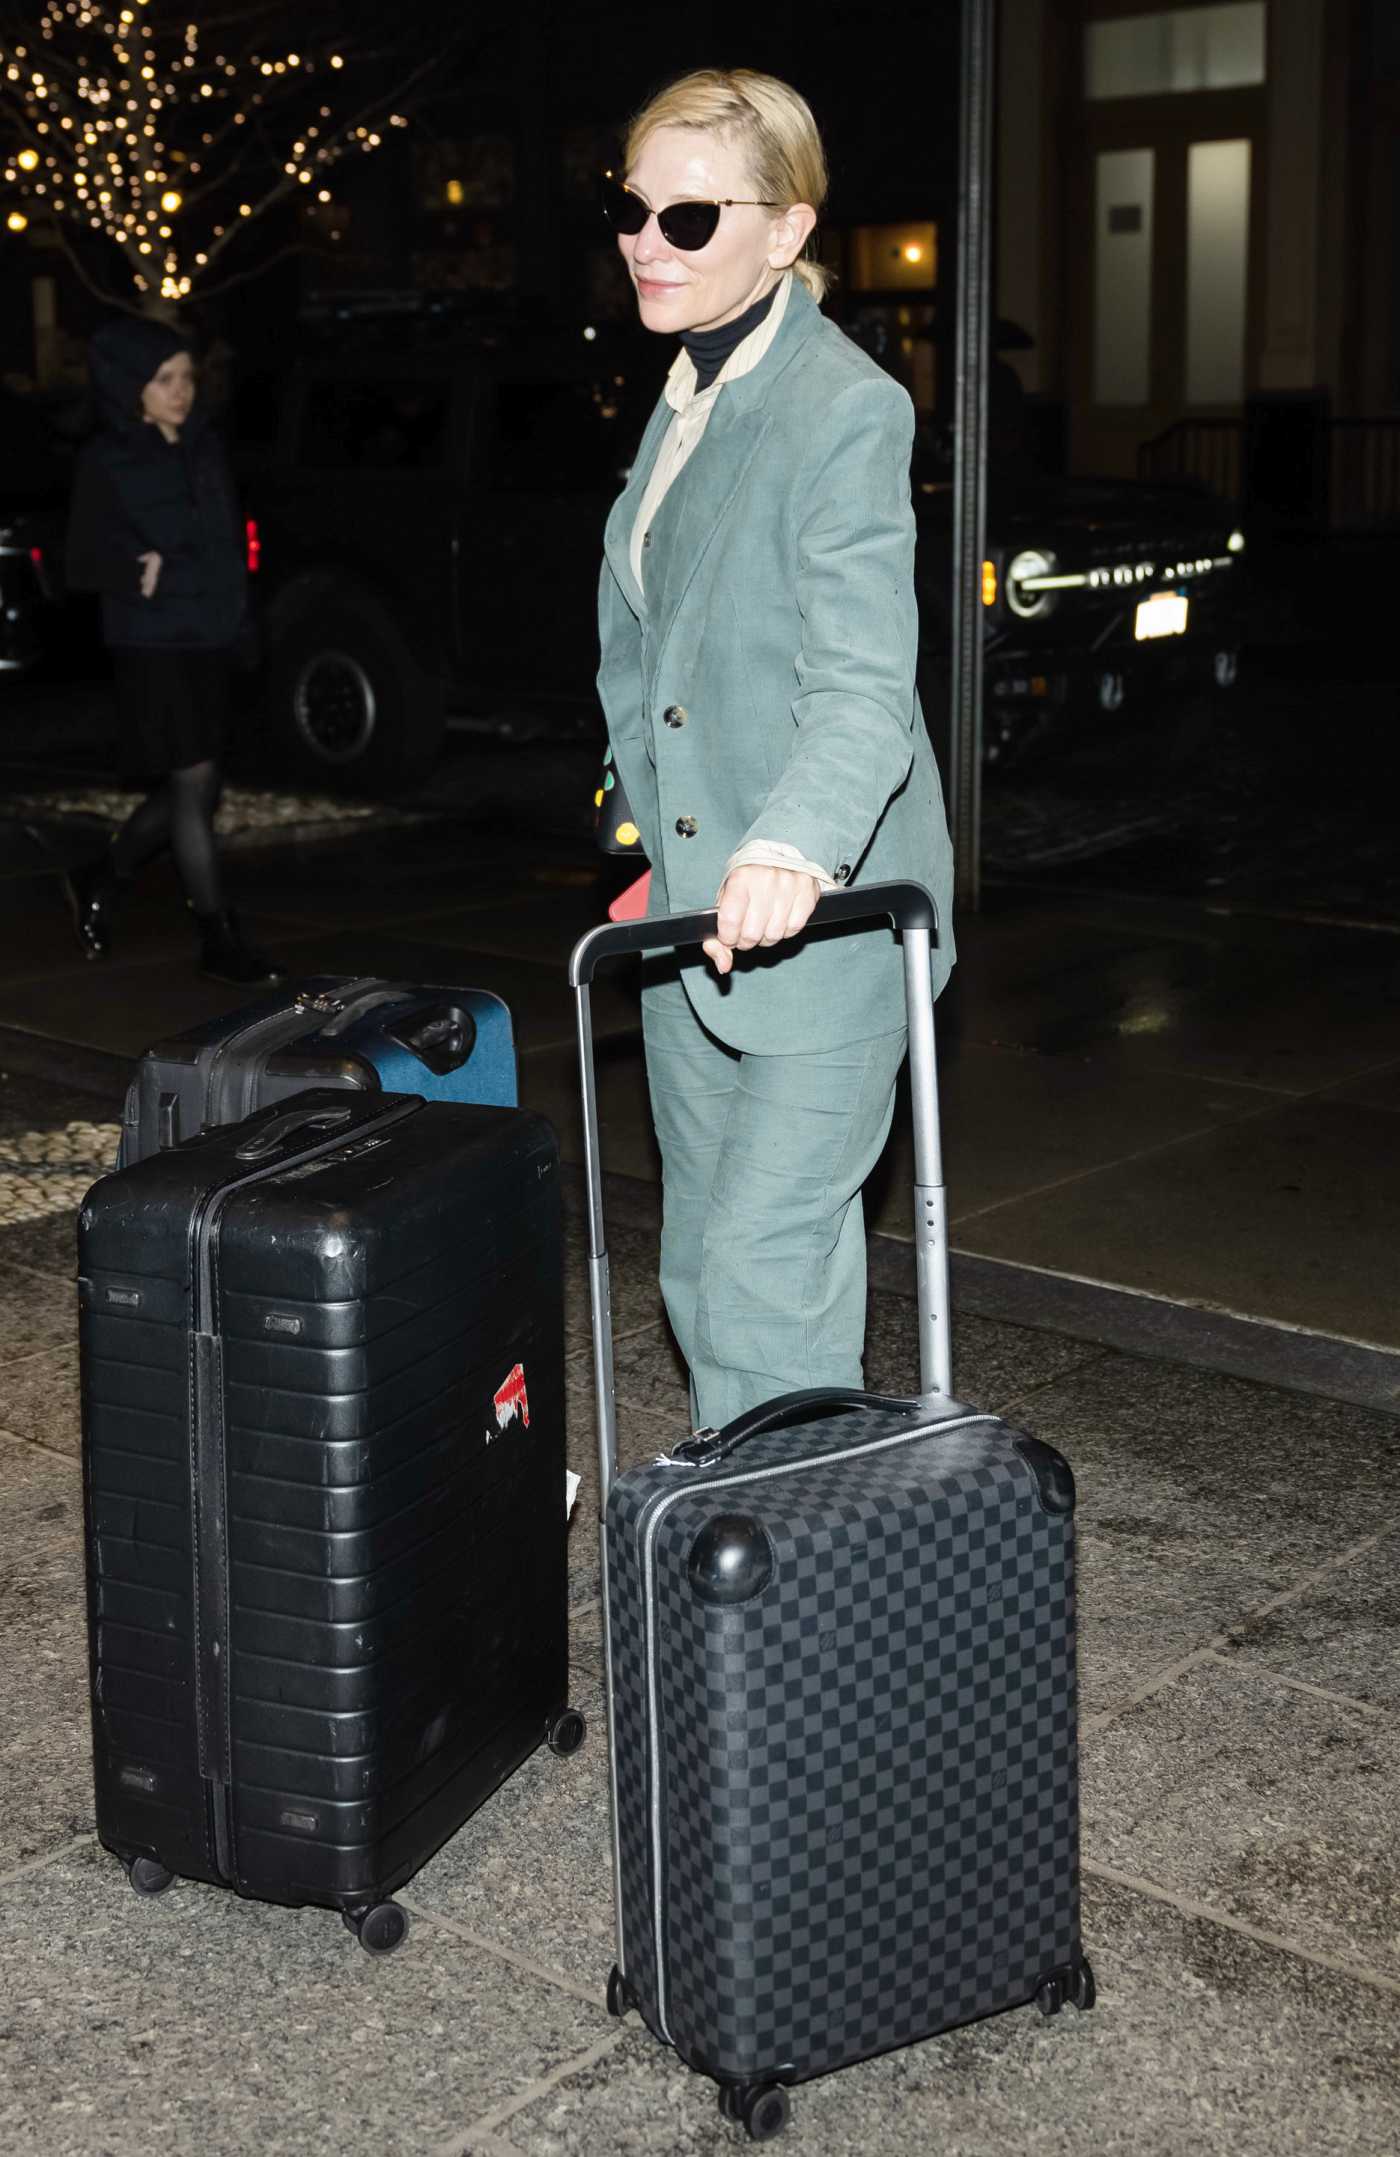 Cate Blanchett in a Turquoise Pantsuit Arrives to JFK Airport in New York 01/04/2023